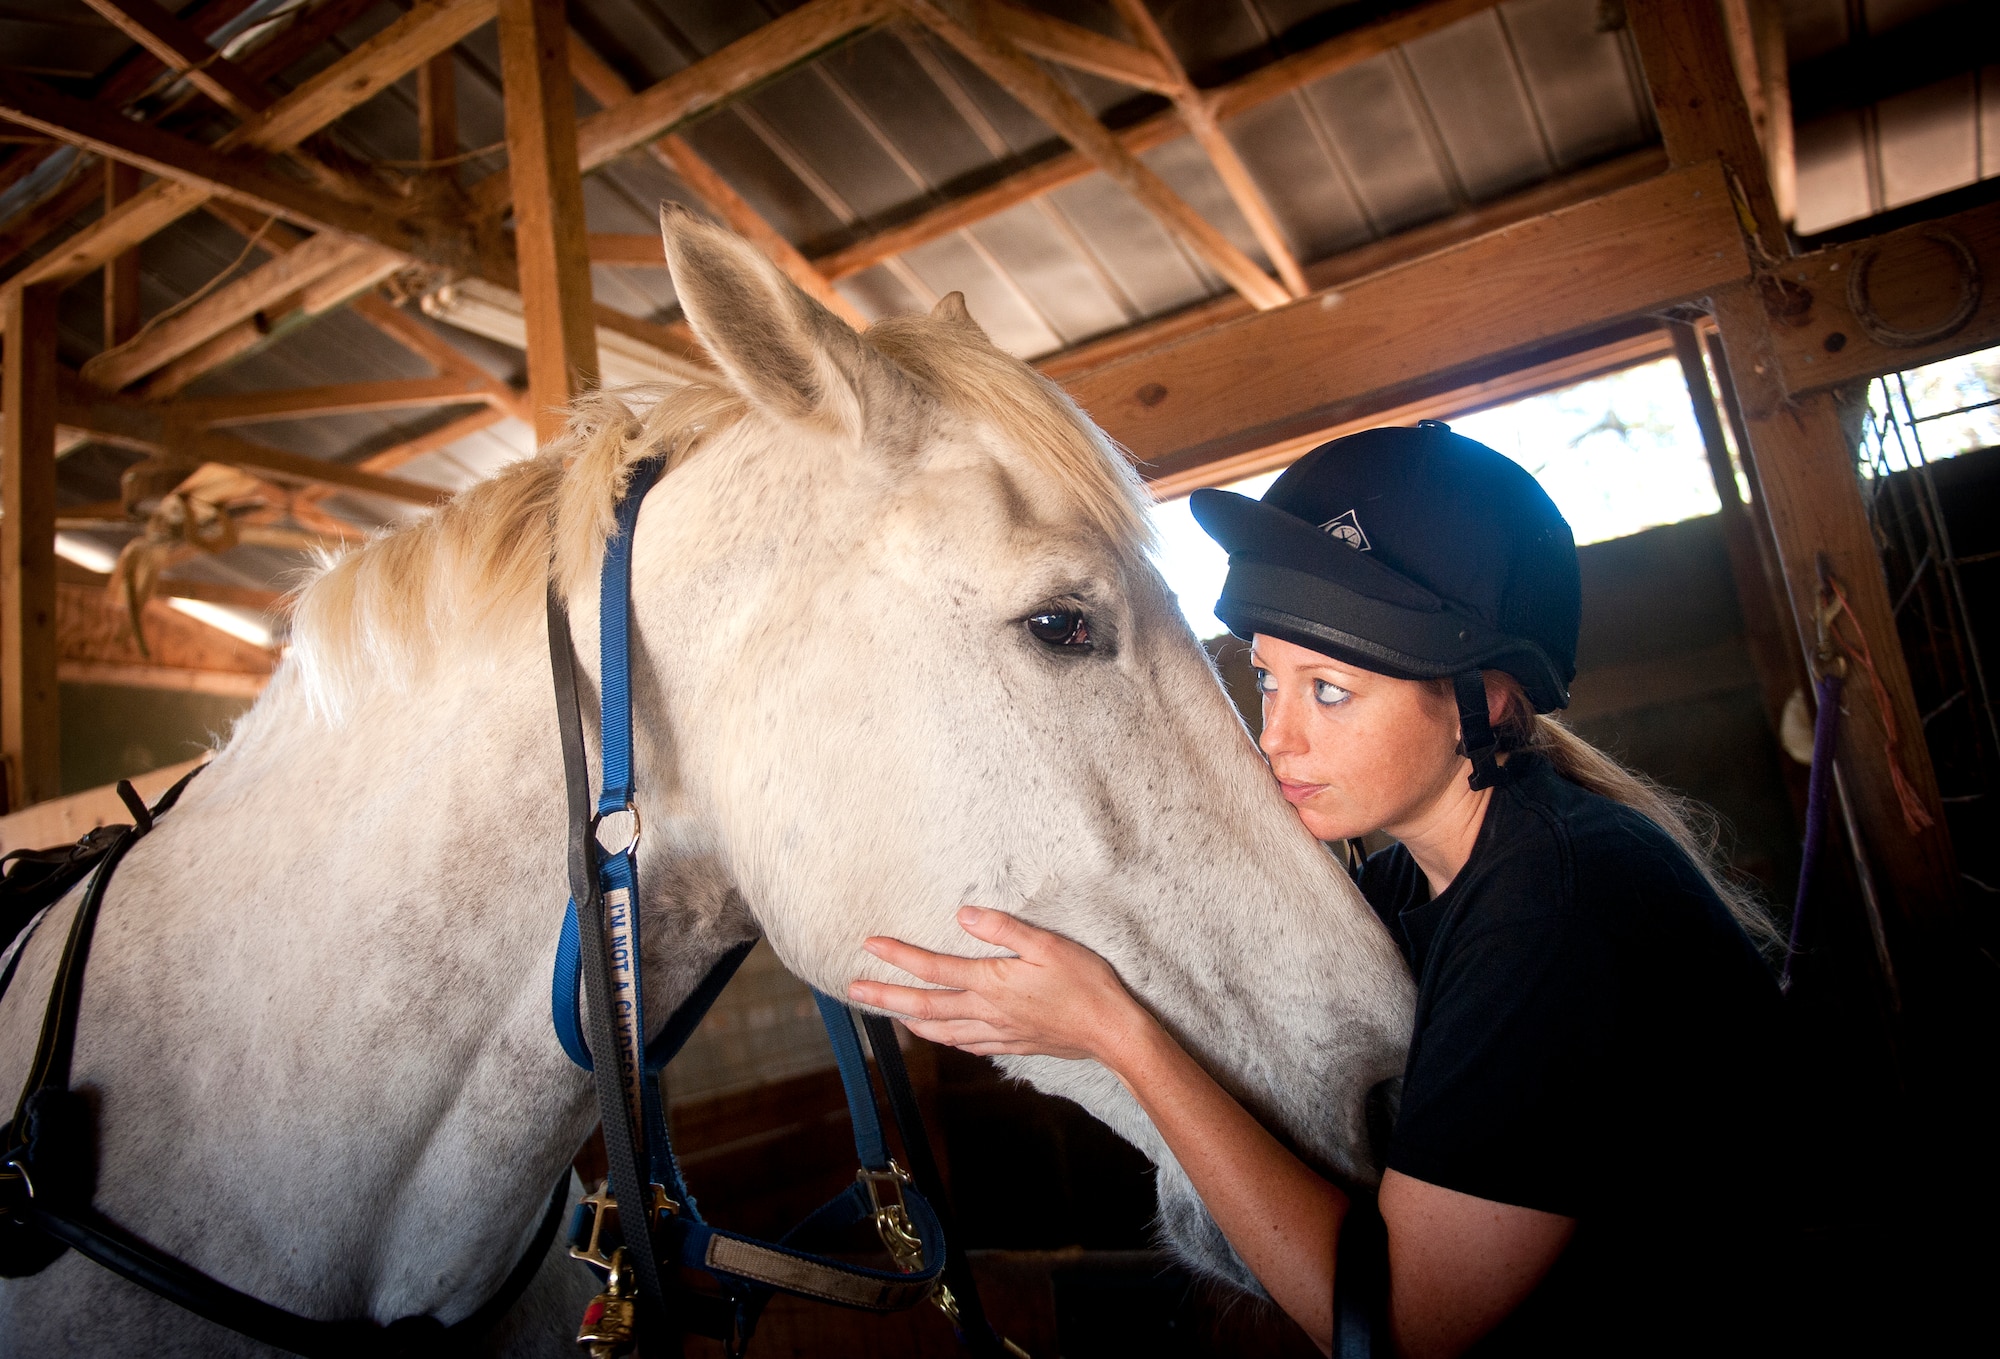 U.S. Air Force Staff Sgt. Stacey Chastain, 23d Wing Judge Advocate military justice paralegal, hugs her horse, Klein, at a stable in Valdosta, Ga., Feb. 3, 2013. Klein is a 1,500-pound Percheron that Chastain competes with in three-day eventing. (U.S. Air Force photo by Senior Airman Jarrod Grammel/Released) 
